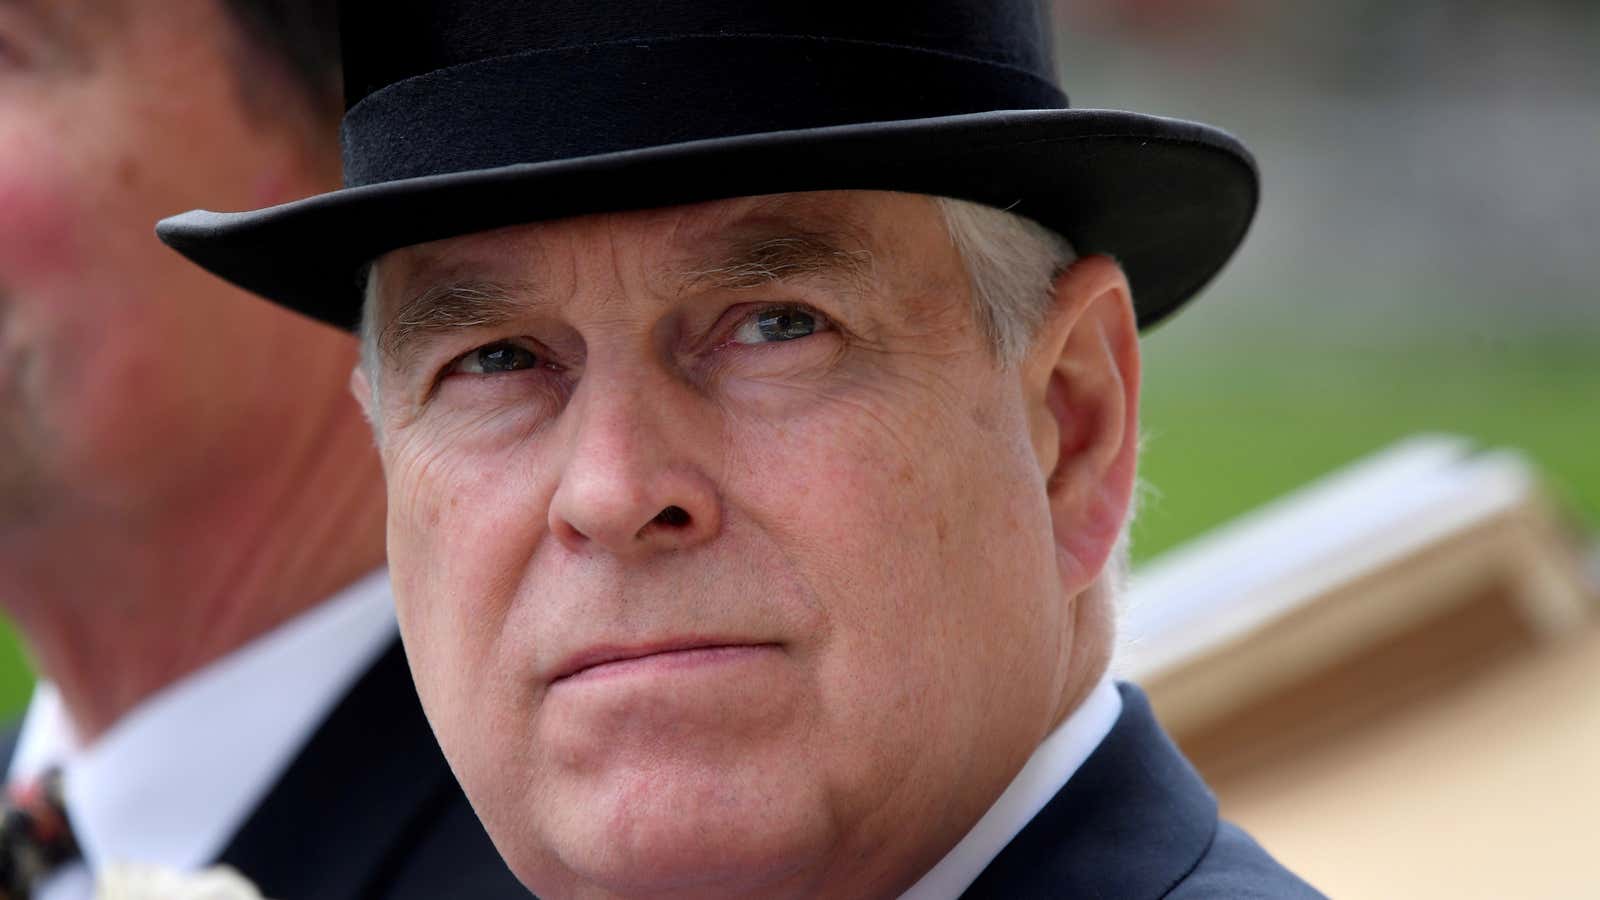 Prince Andrew expresses his regrets. Again.